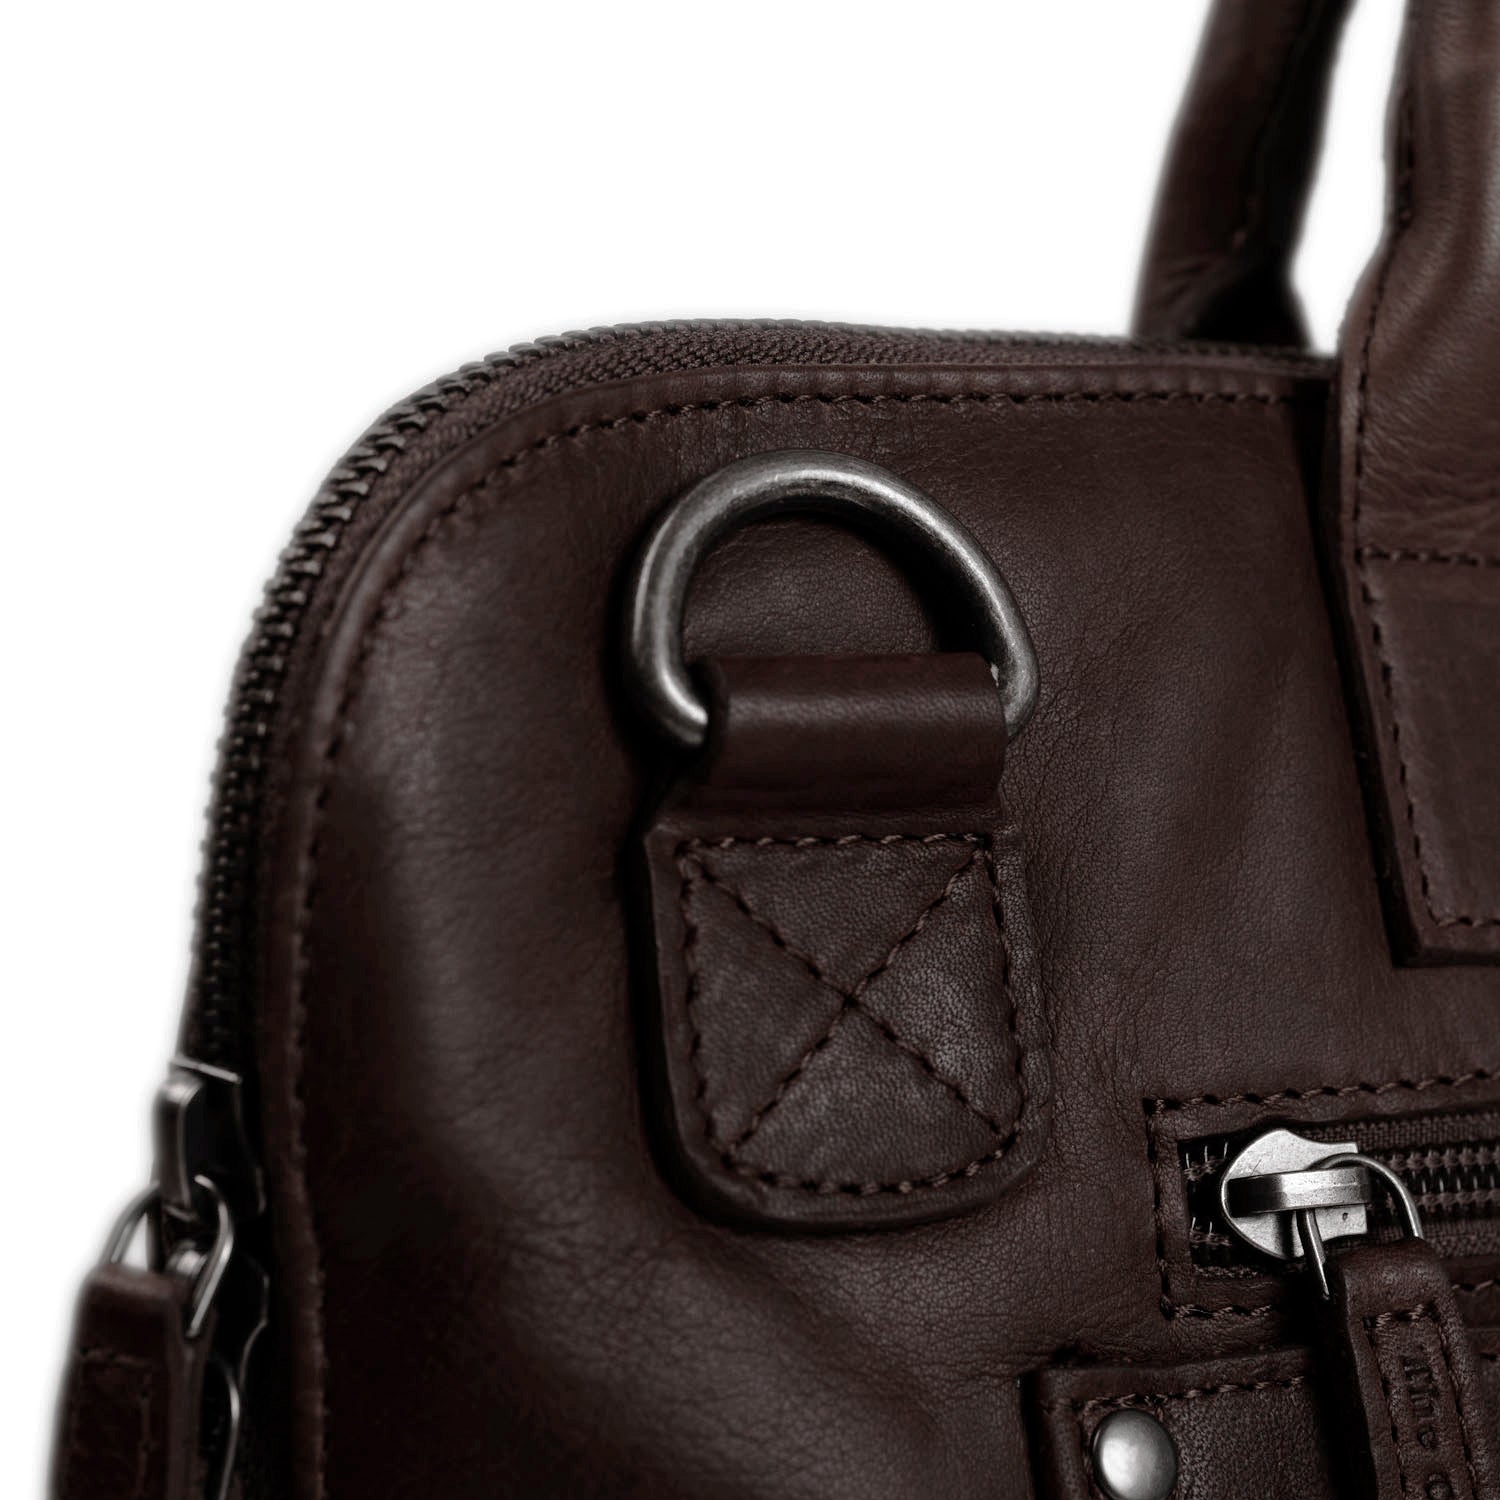 Leather Laptop Bag - The Chesterfield Brand Harvey Brown